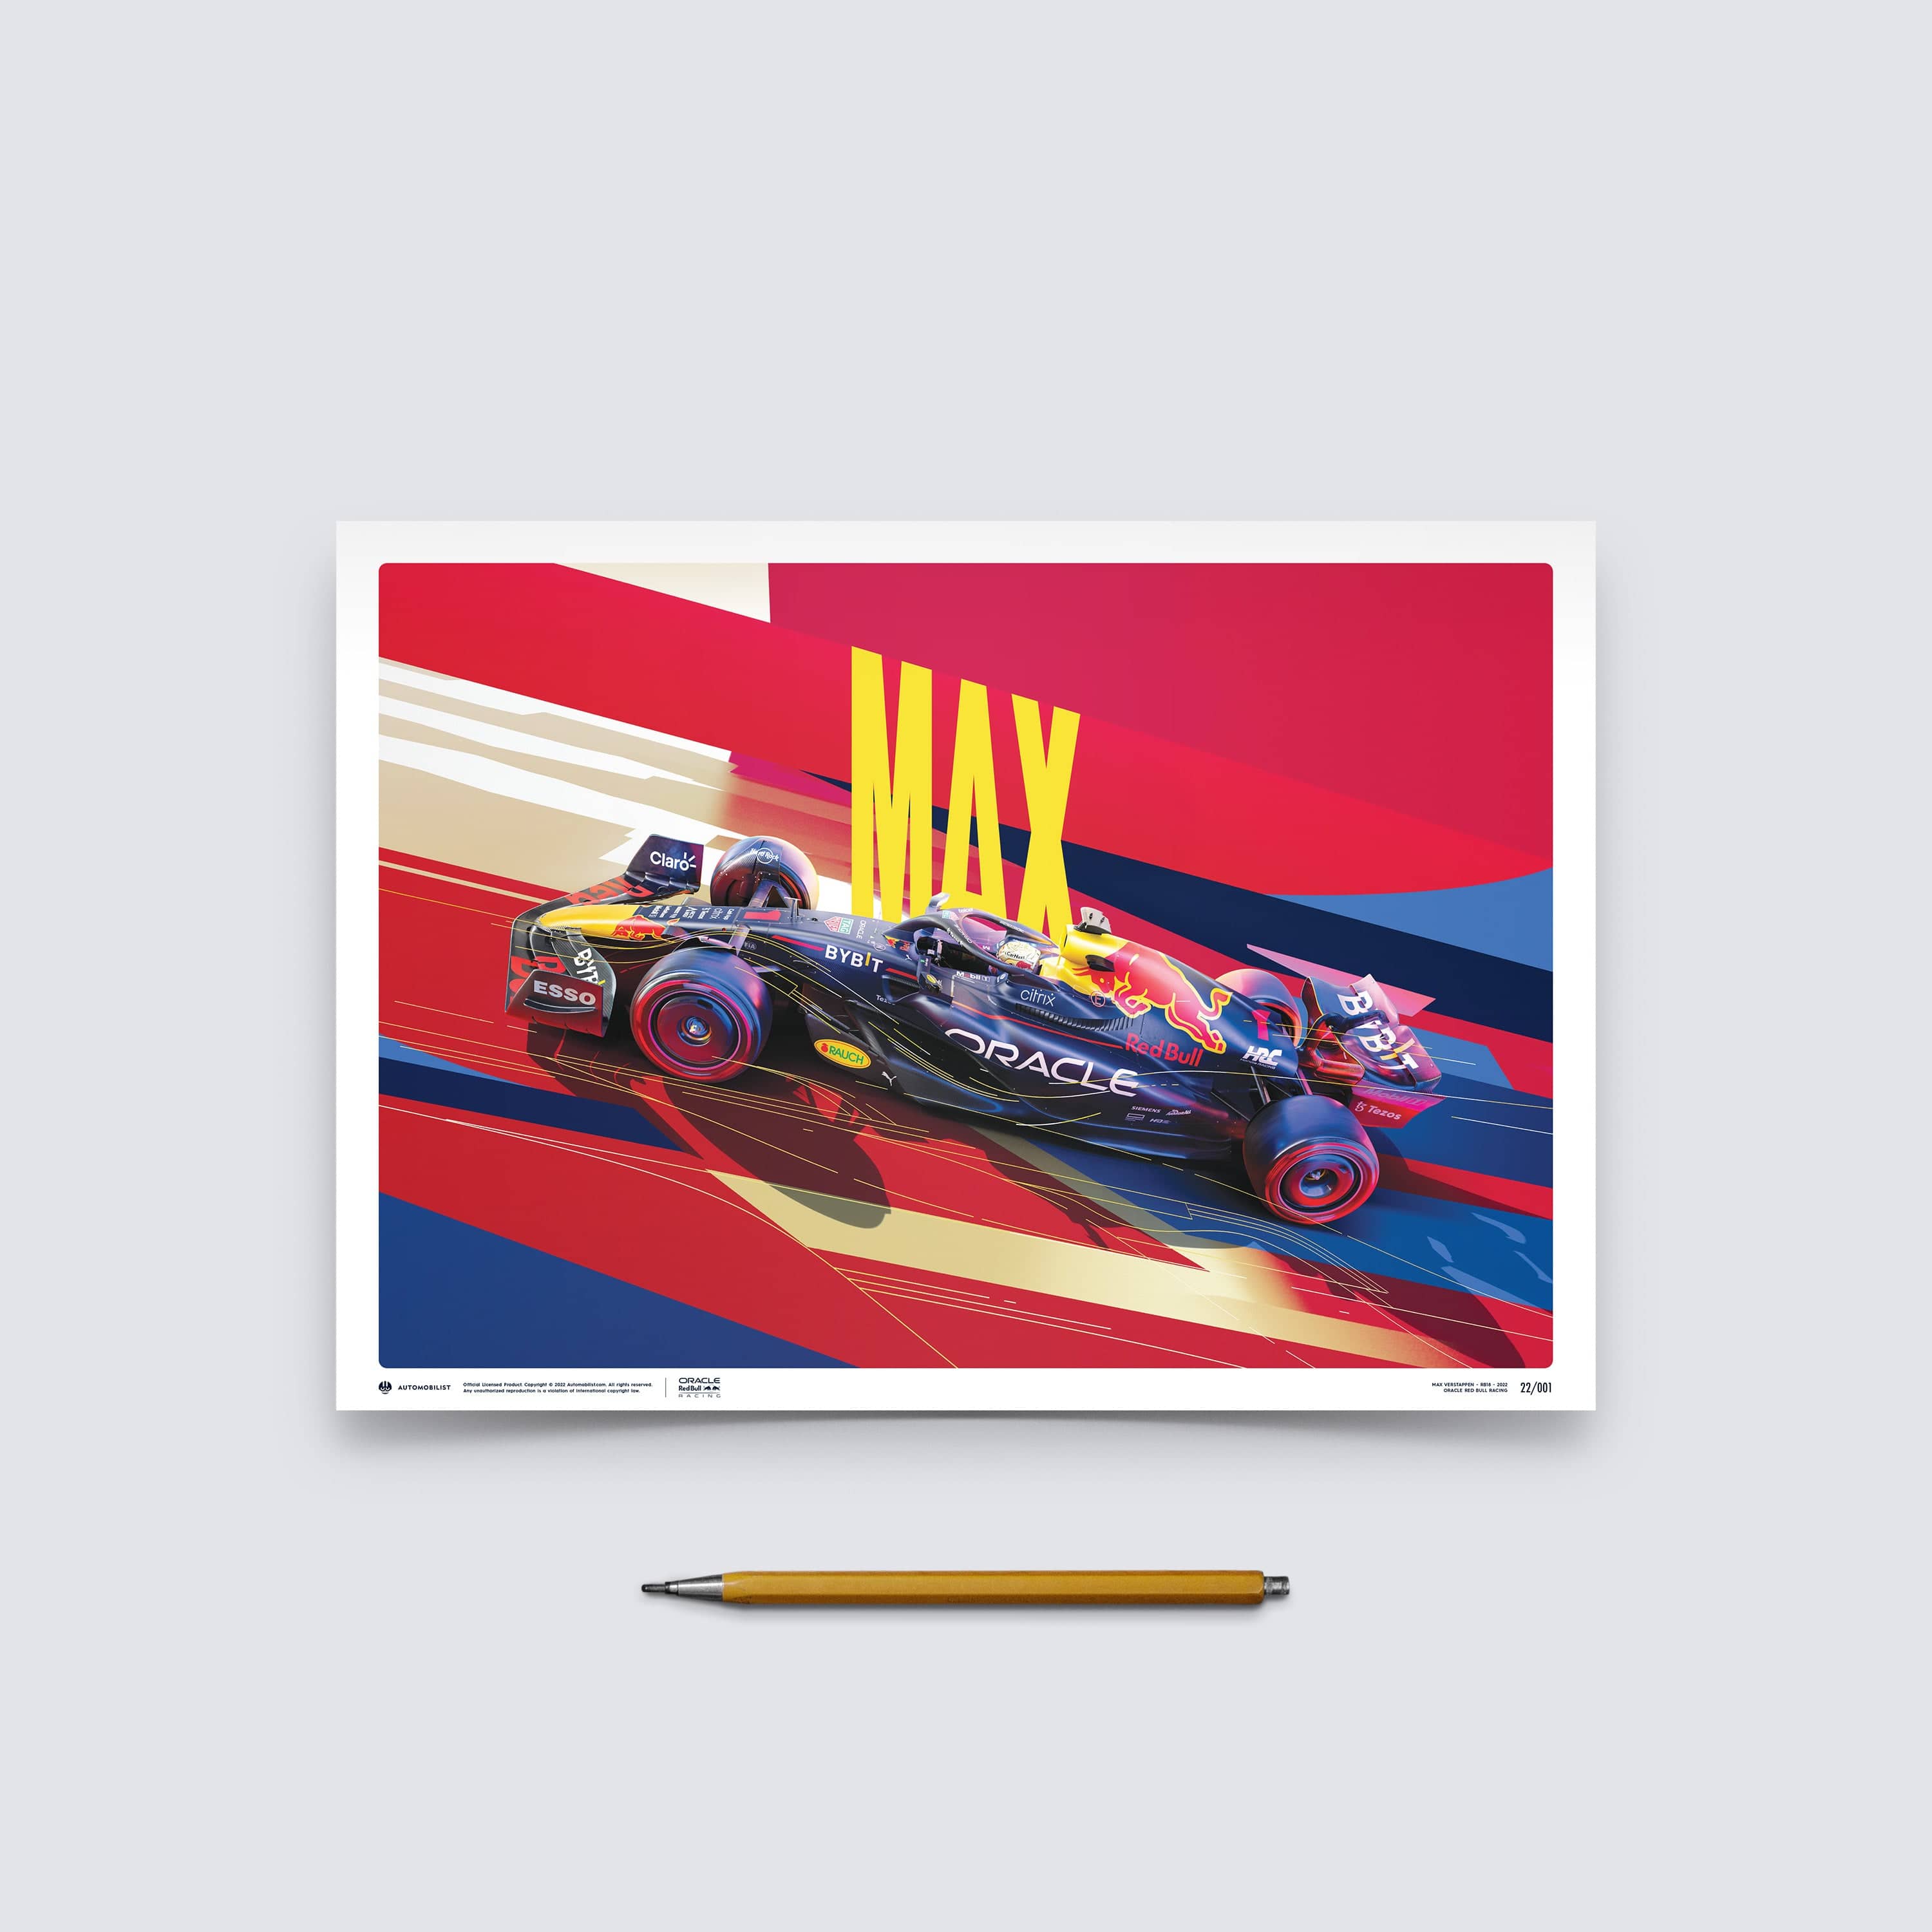 Oracle Red Bull Racing - Sergio Perez - 2022 Reproduction d'art